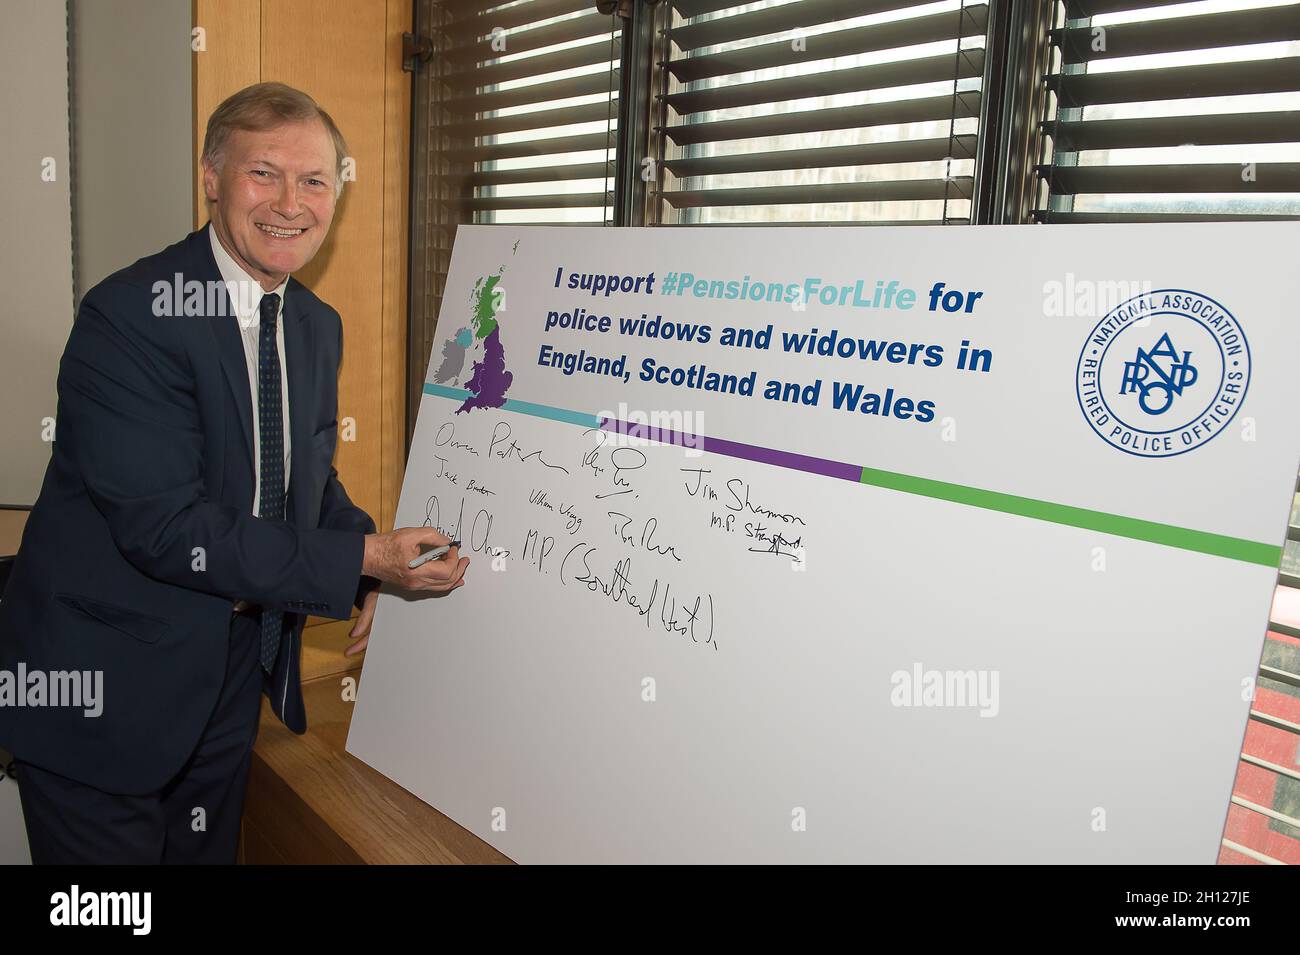 London, UK. 1st May, 2019. Sir David Amess MP for Southend West signs his support for the Pensions for Life for police widows and widowers in England, Scotland and Wales at a Parliamentary Drop-In at Portcullis House. Obituary: Sir David was tragically stabbed to death in his constituency on Friday 15th October 2021. Sir David had been an MP since 1983. Credit: Maureen McLean/Alamy Stock Photo